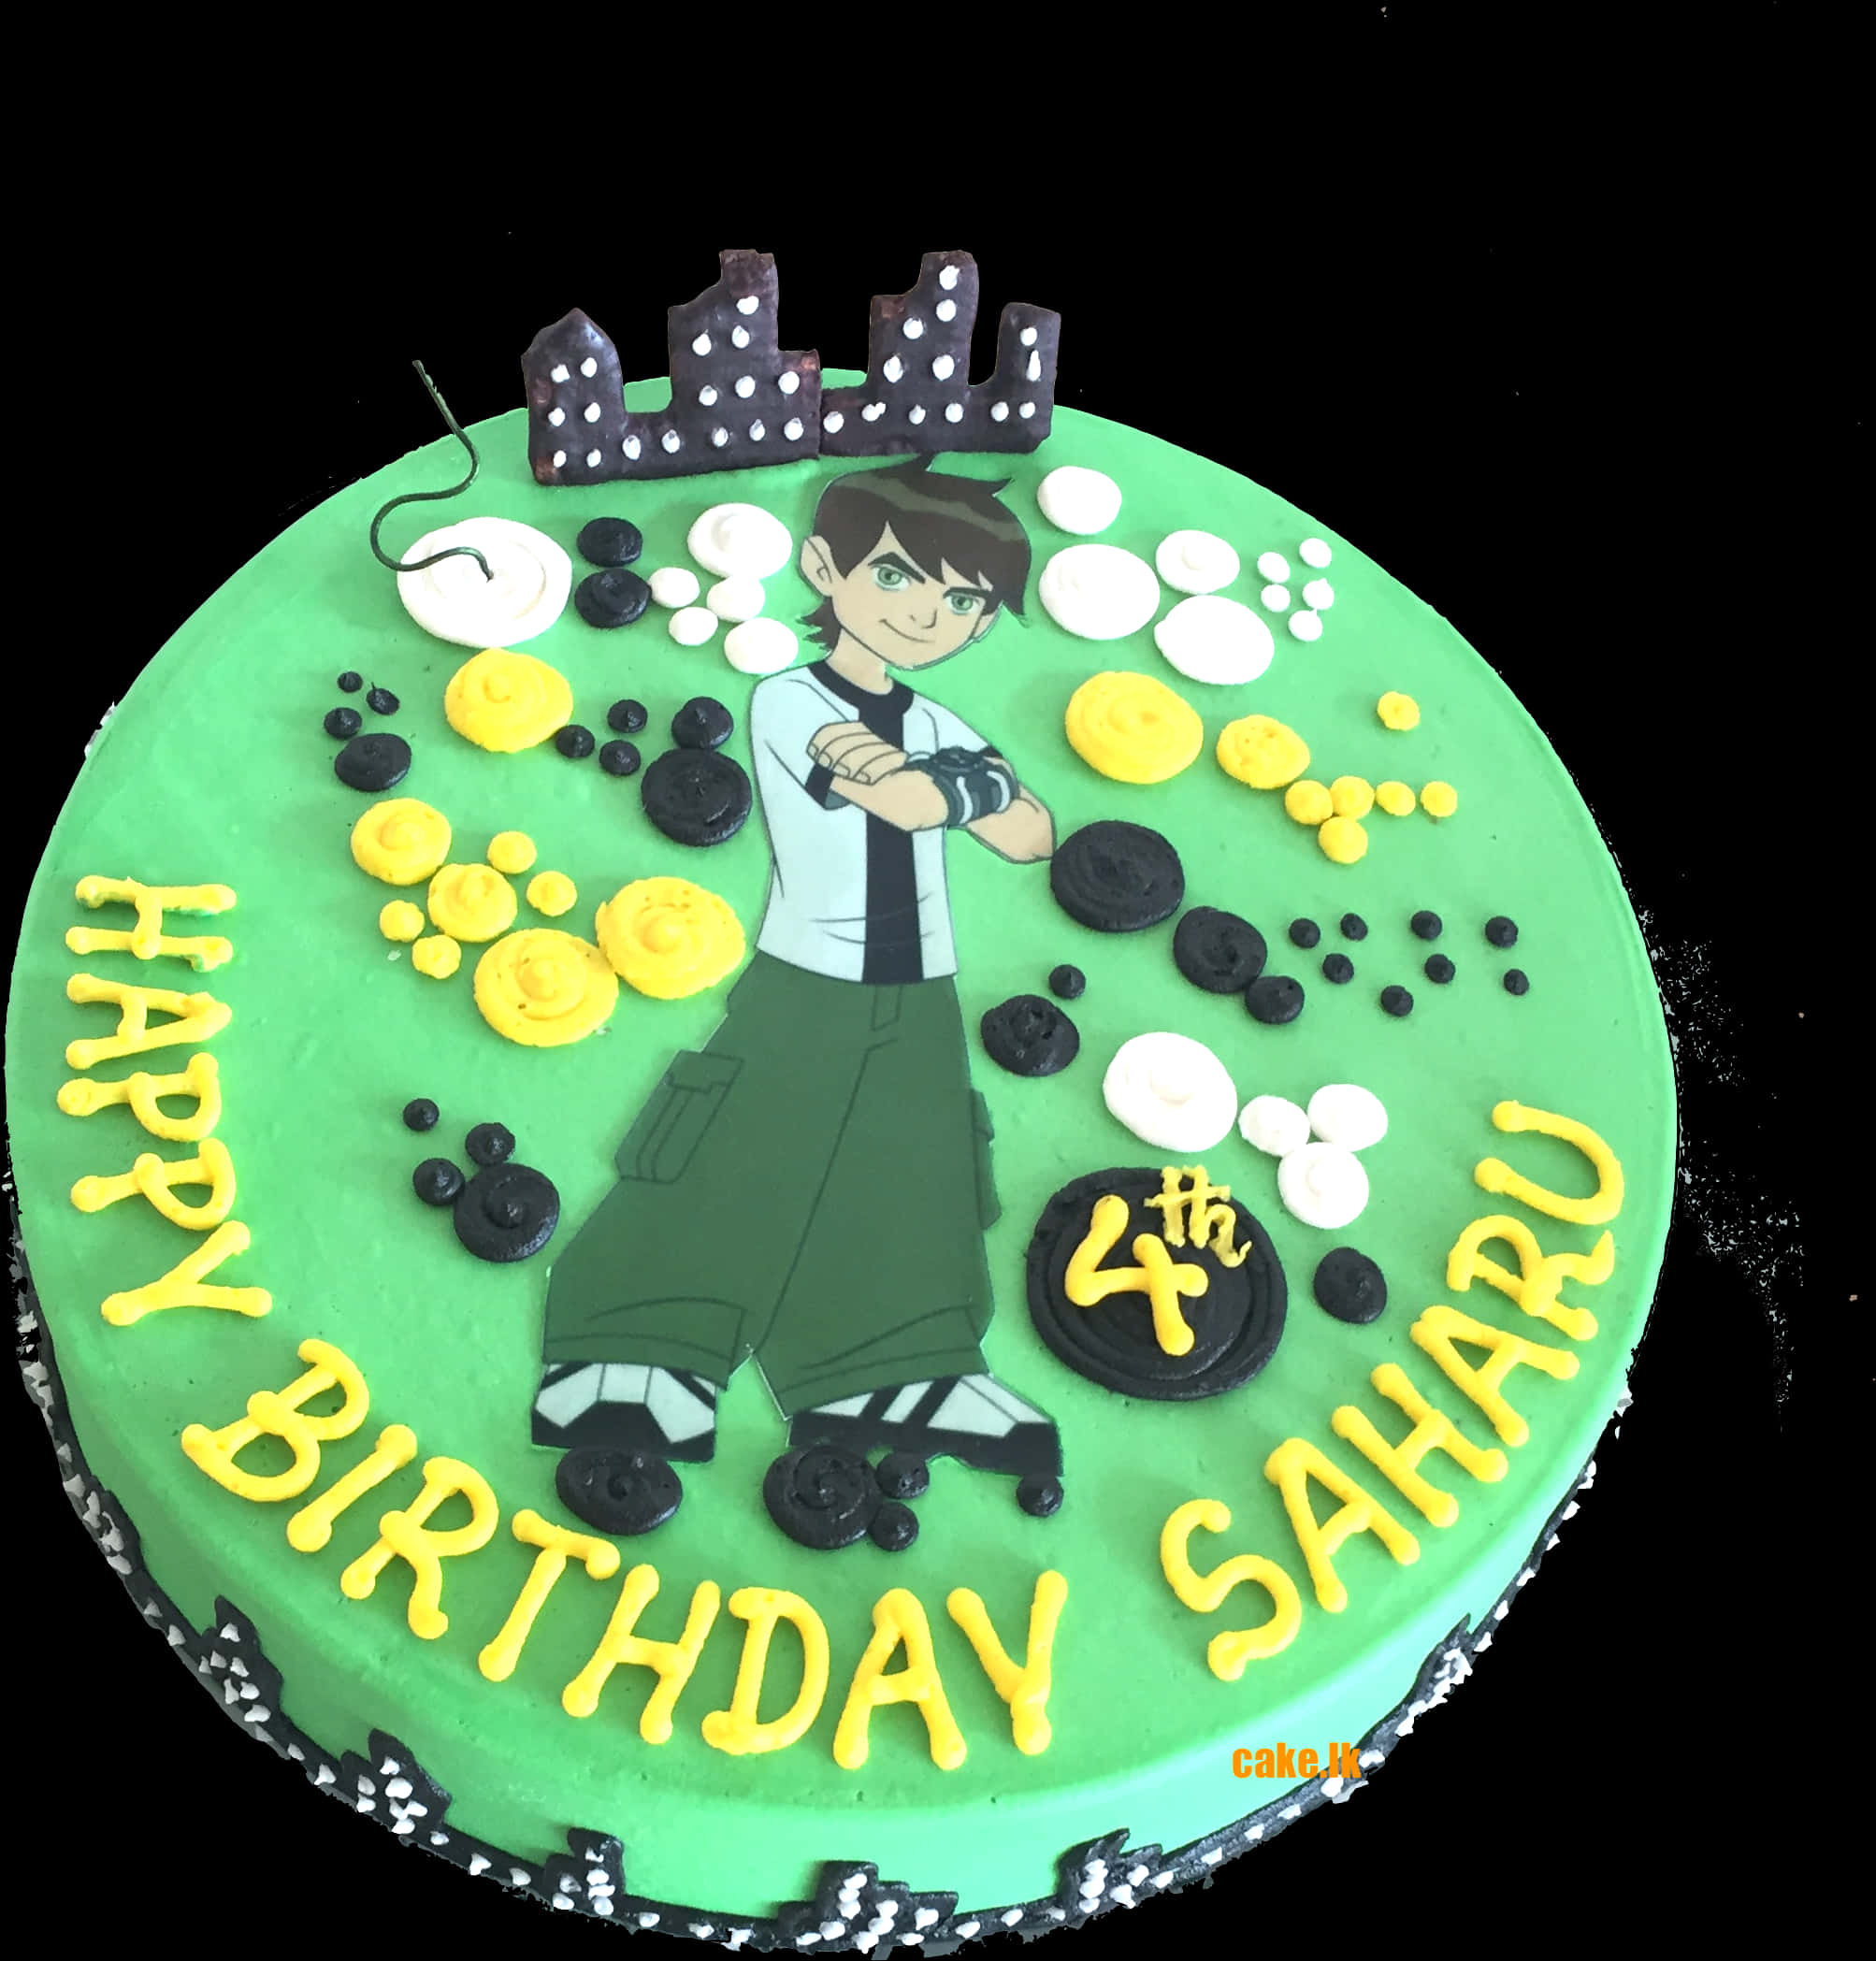 A Green Cake With Yellow Text And Cartoon Character On It